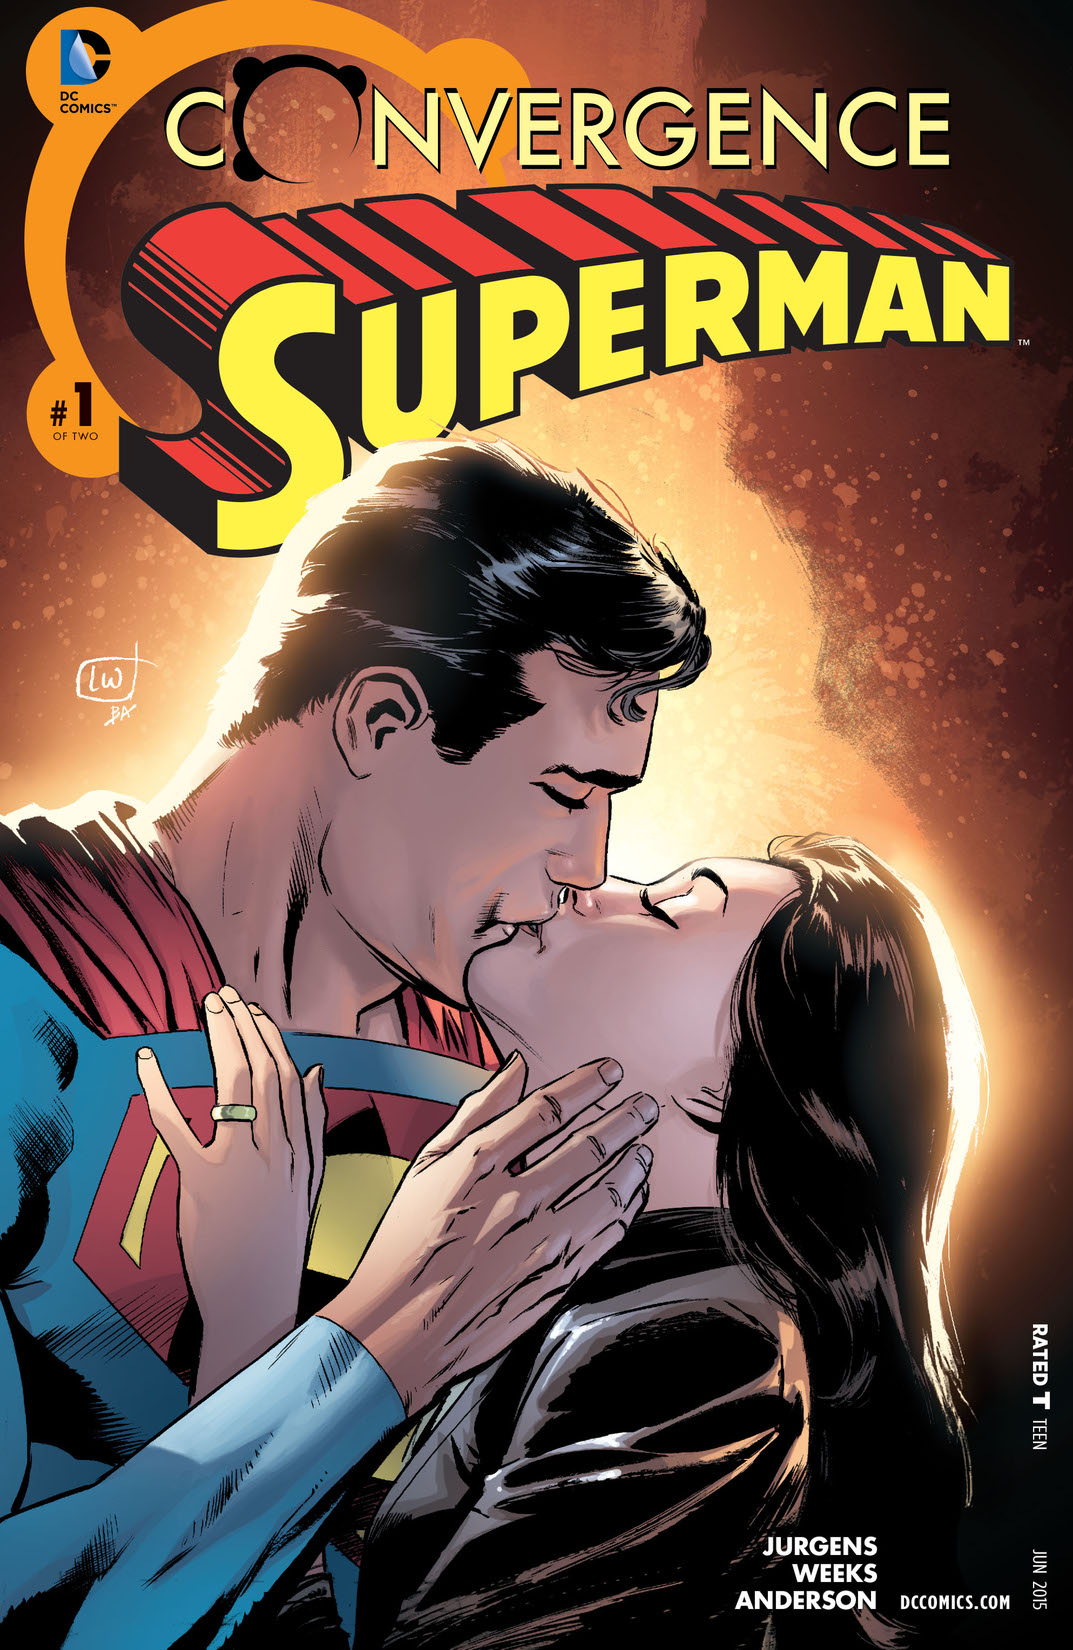 Convergence: Superman #1 preview images